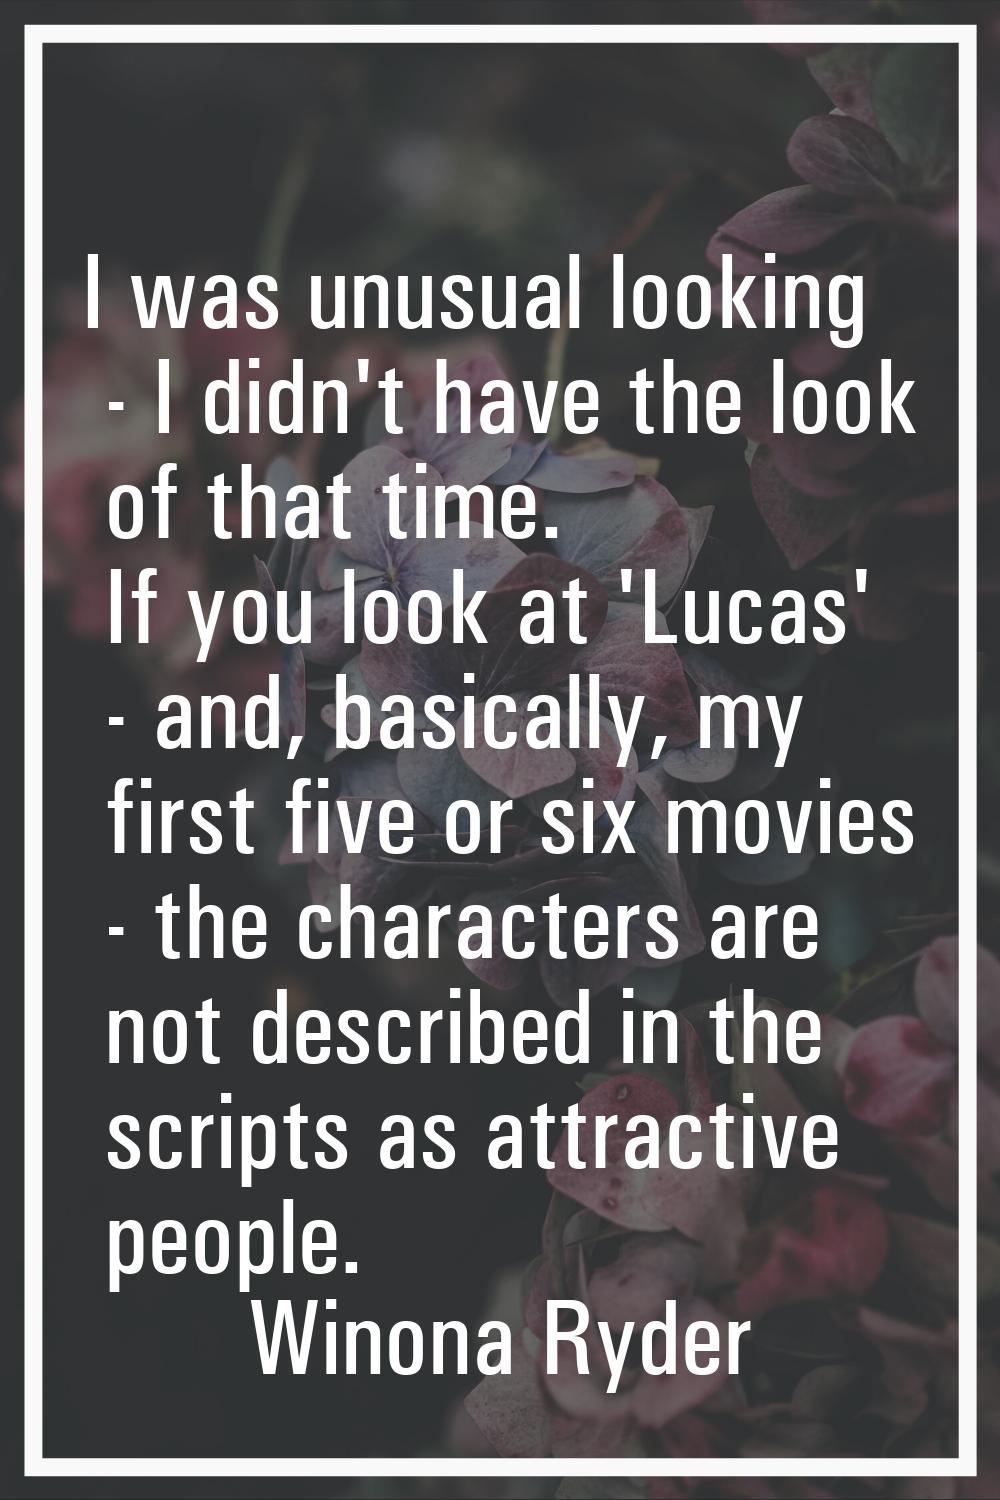 I was unusual looking - I didn't have the look of that time. If you look at 'Lucas' - and, basicall